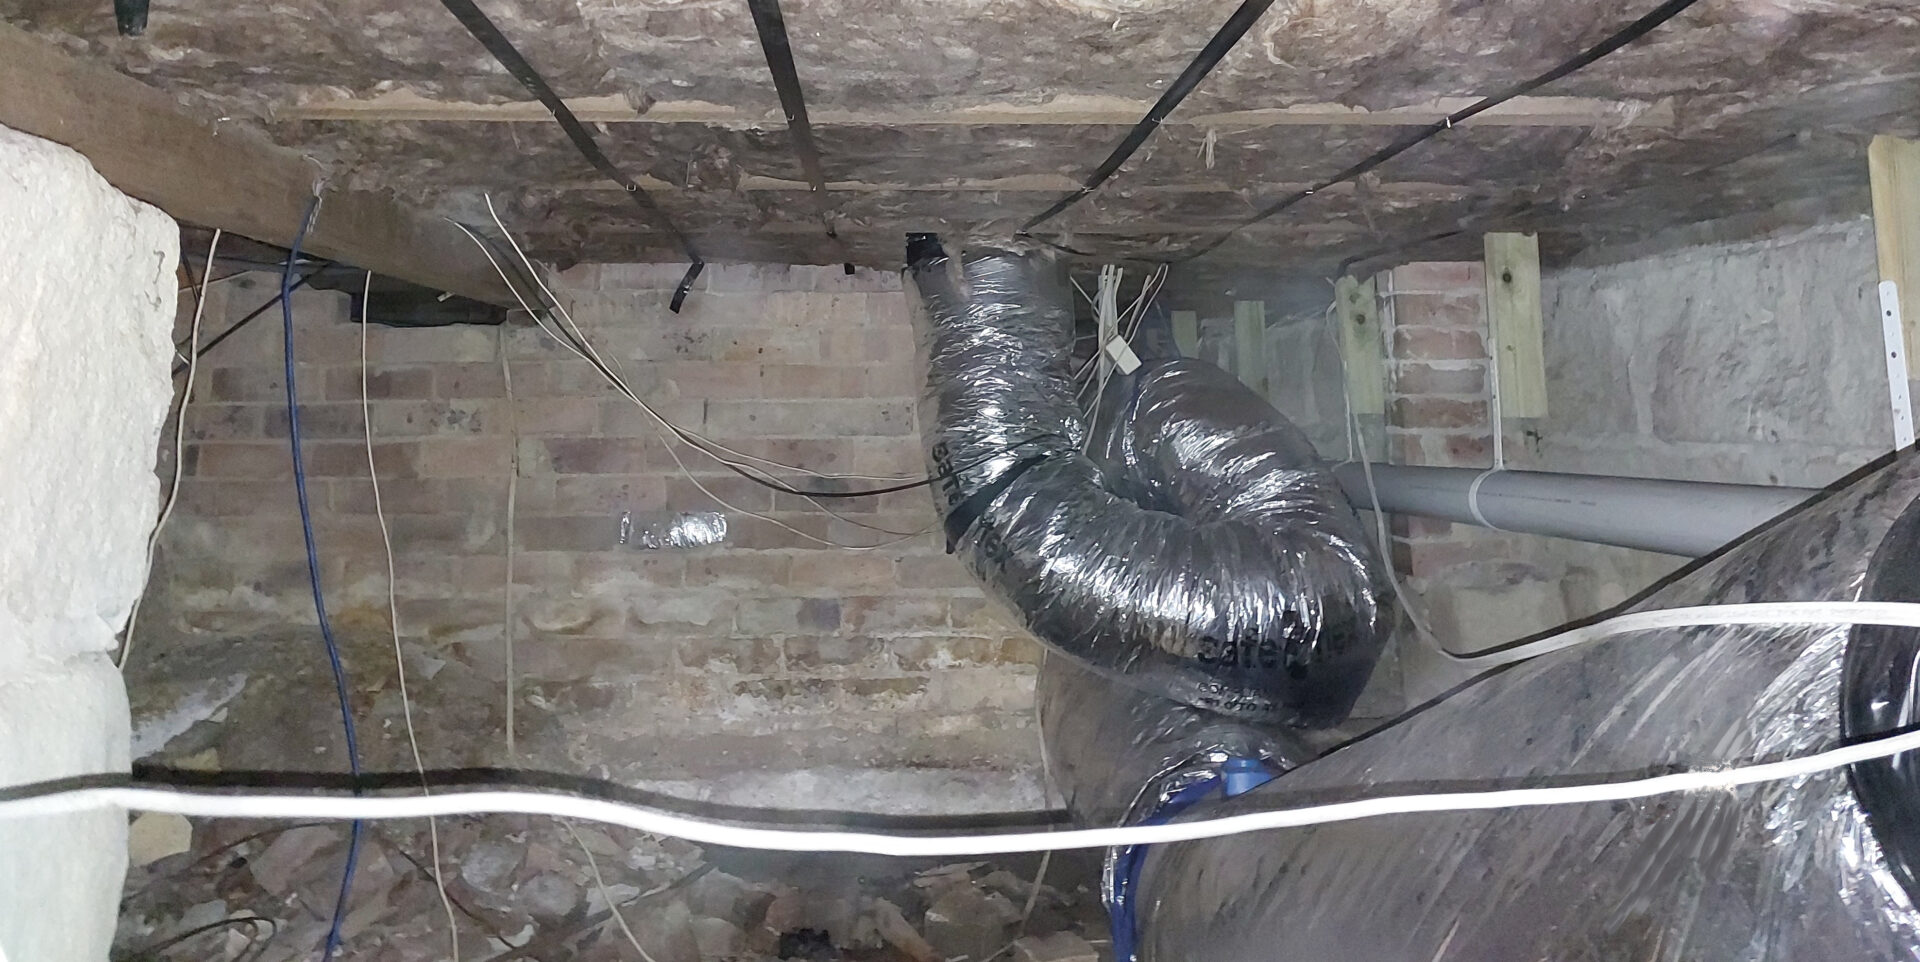 Underfloor insulation work area with exposed brick and ductwork